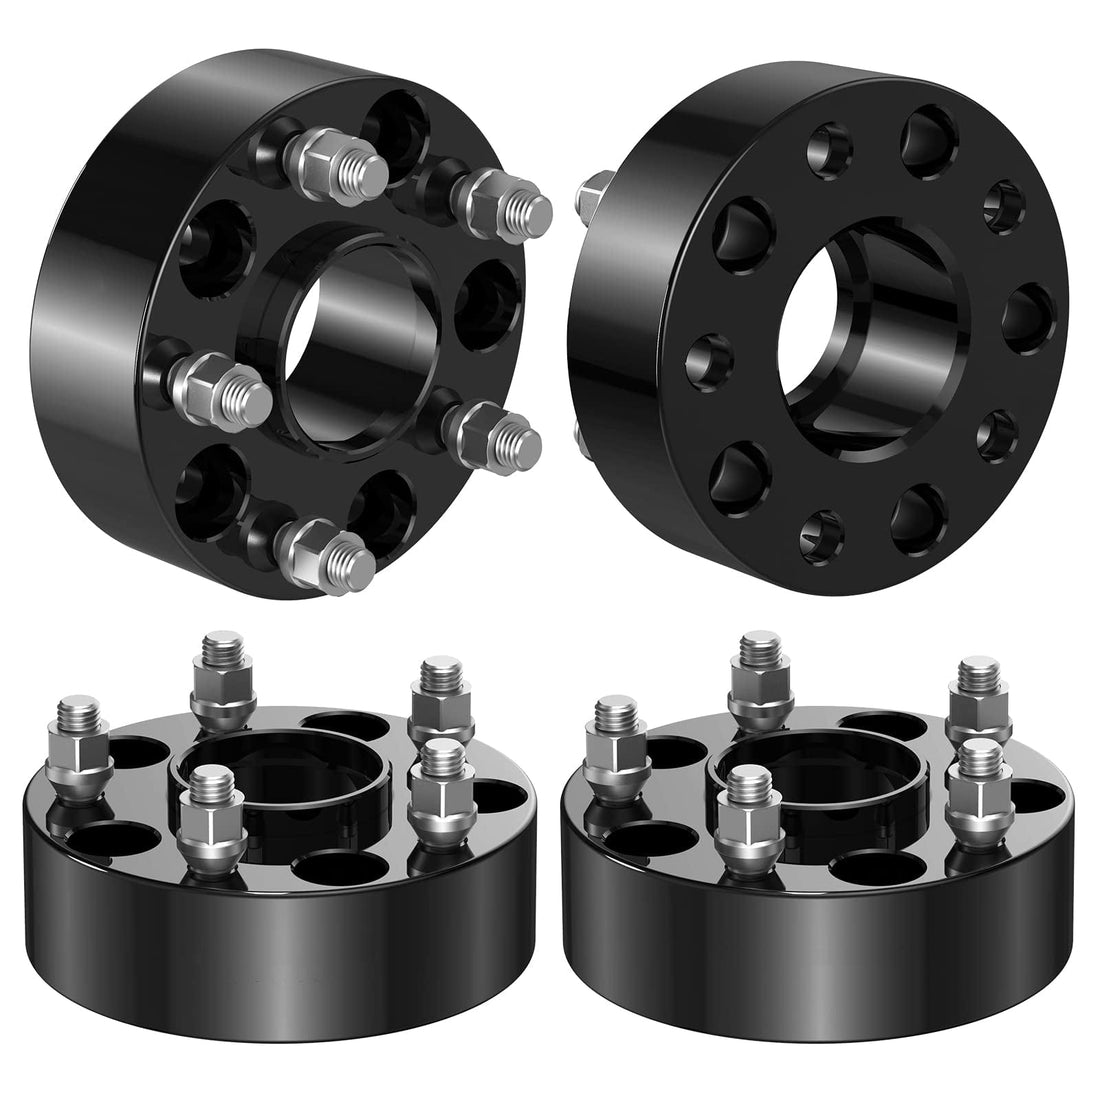 2 Inch 5x5 Hubcentric Wheel Spacers for Wrangler 2007-2017